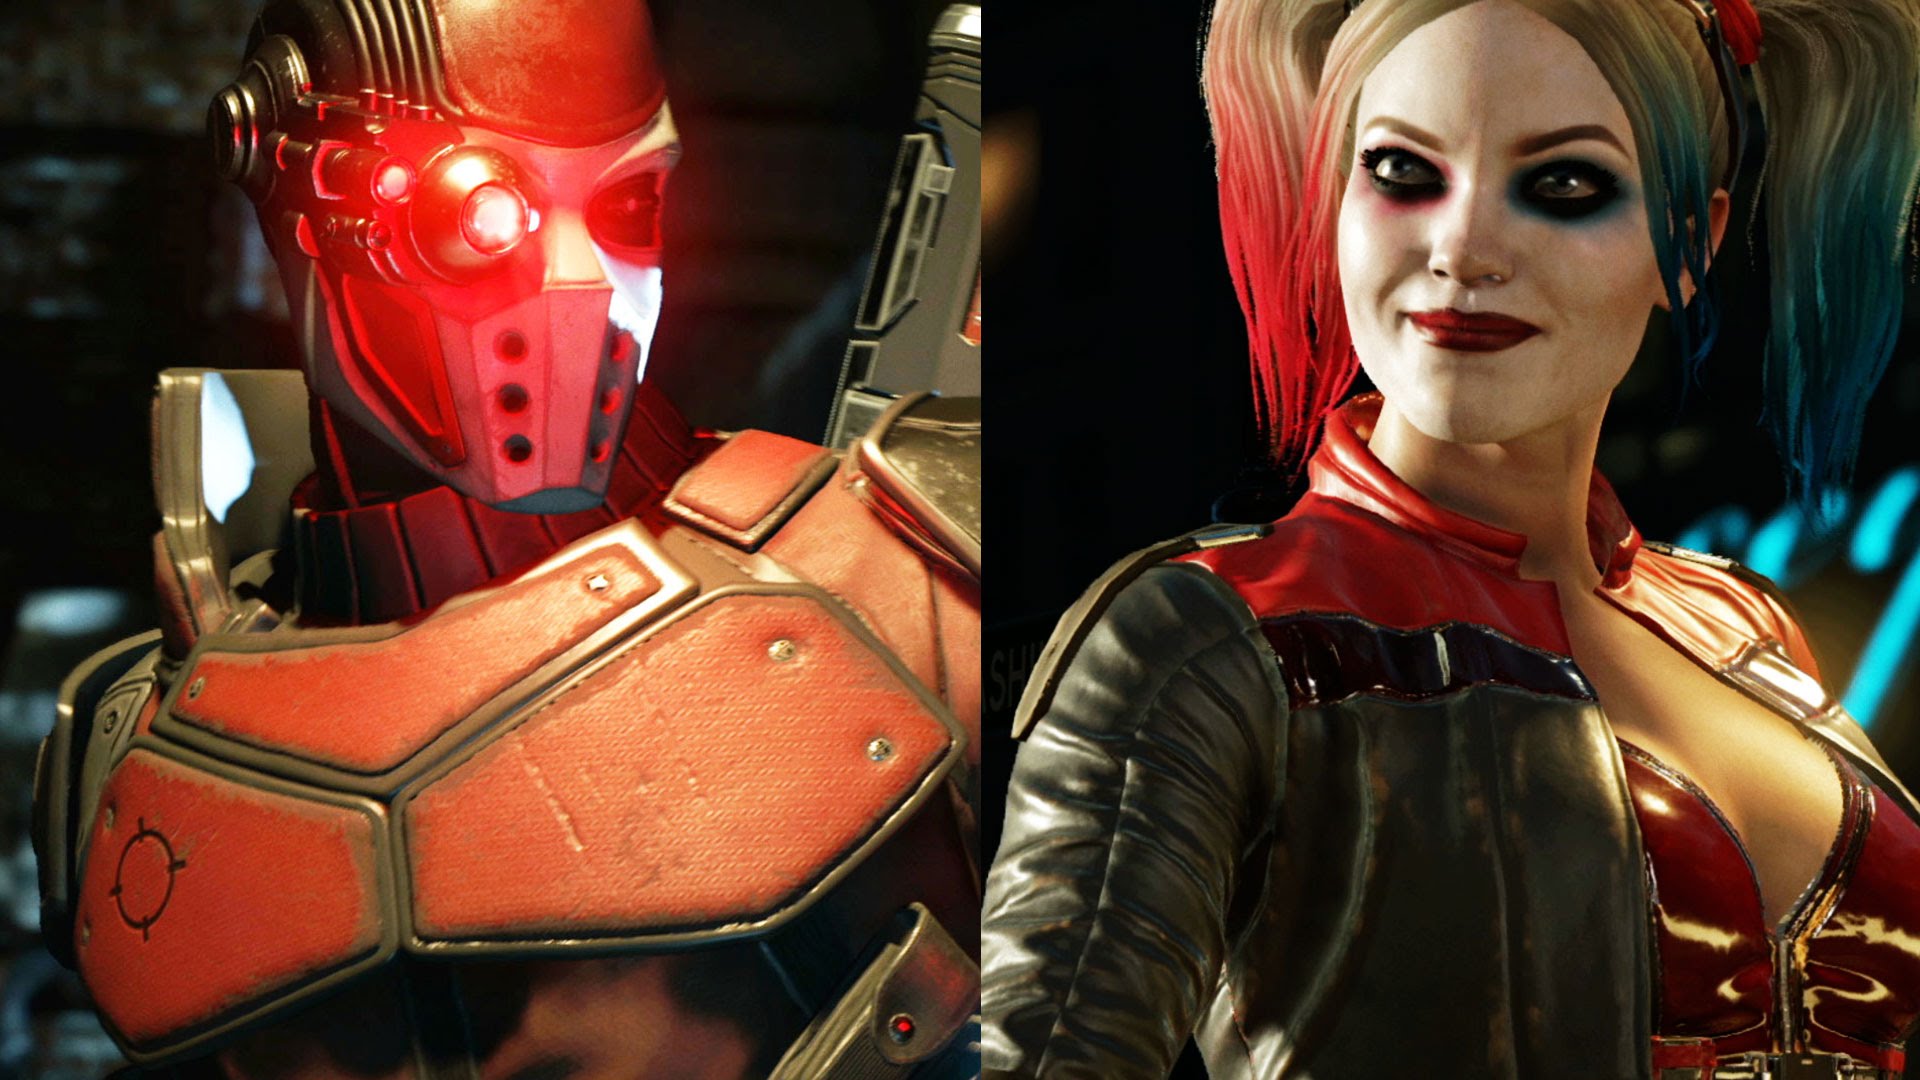 WATCH: ‘Injustice 2’ Harley Quinn and Deadshot Reveal Trailer